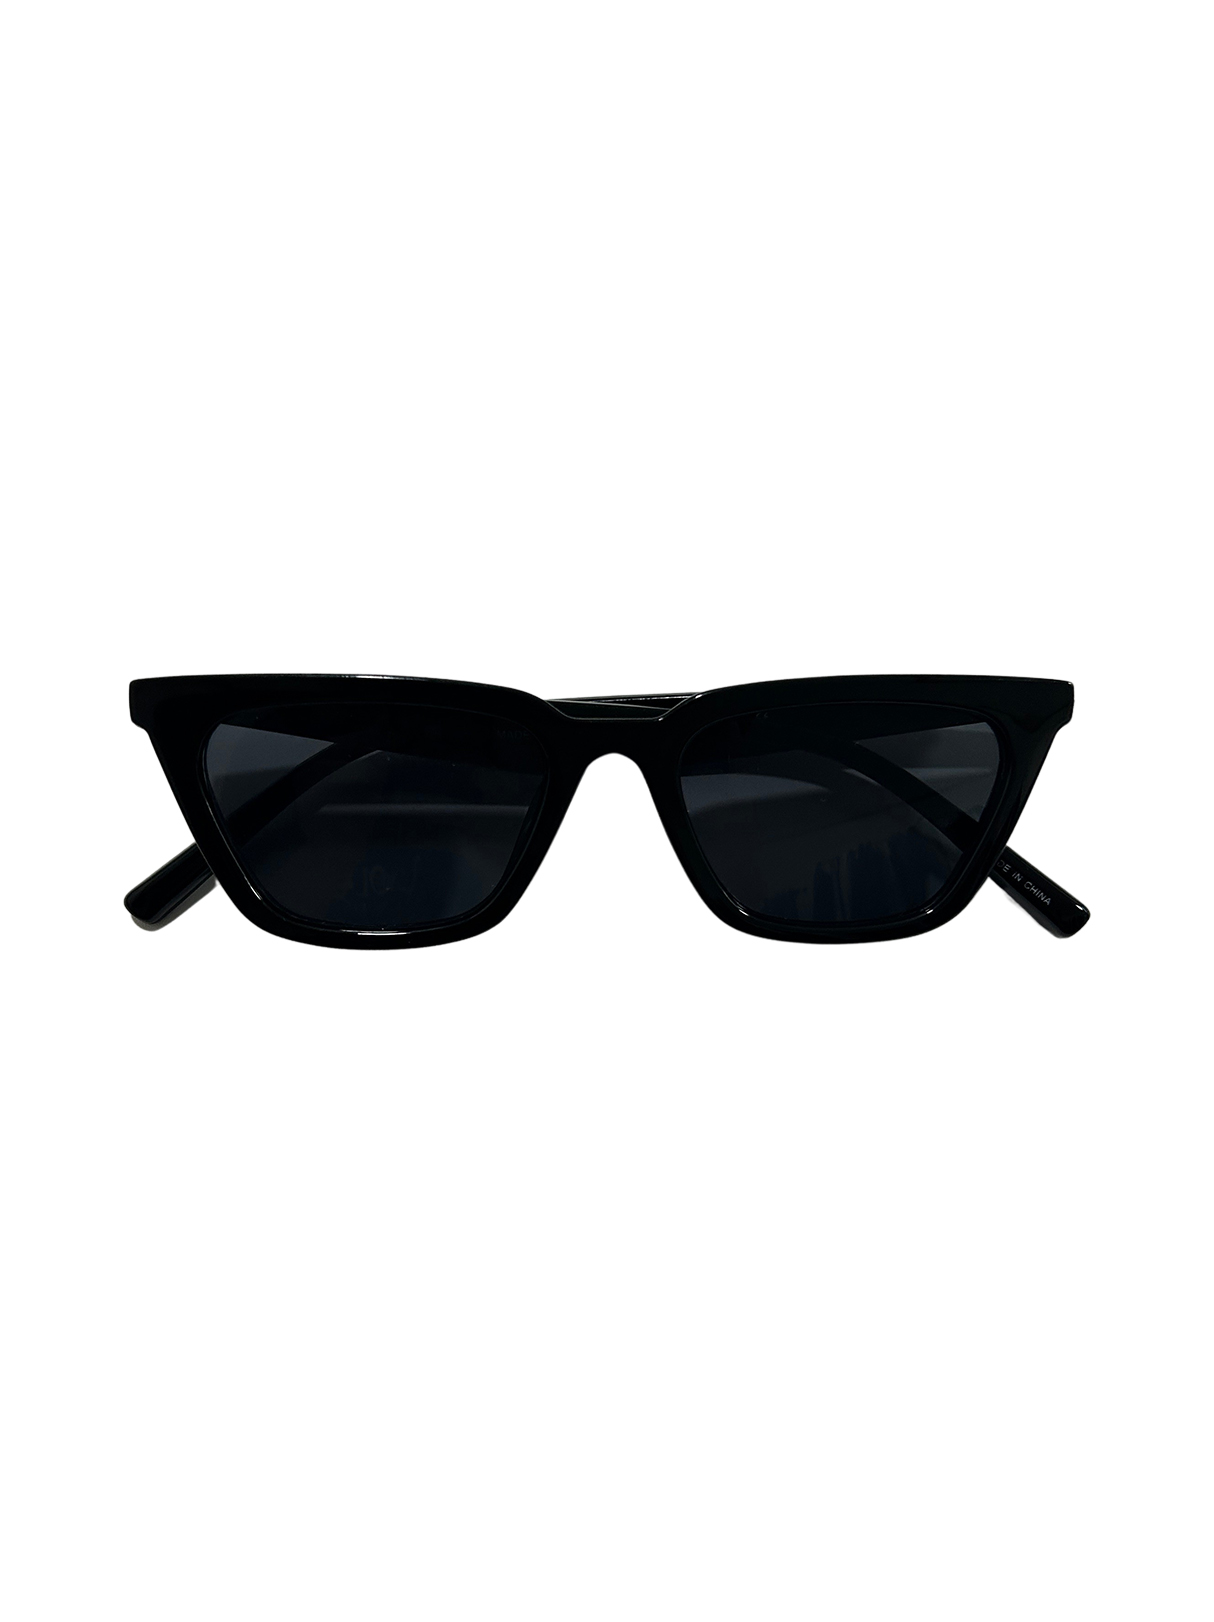 Daily Rectangle Sunglasses